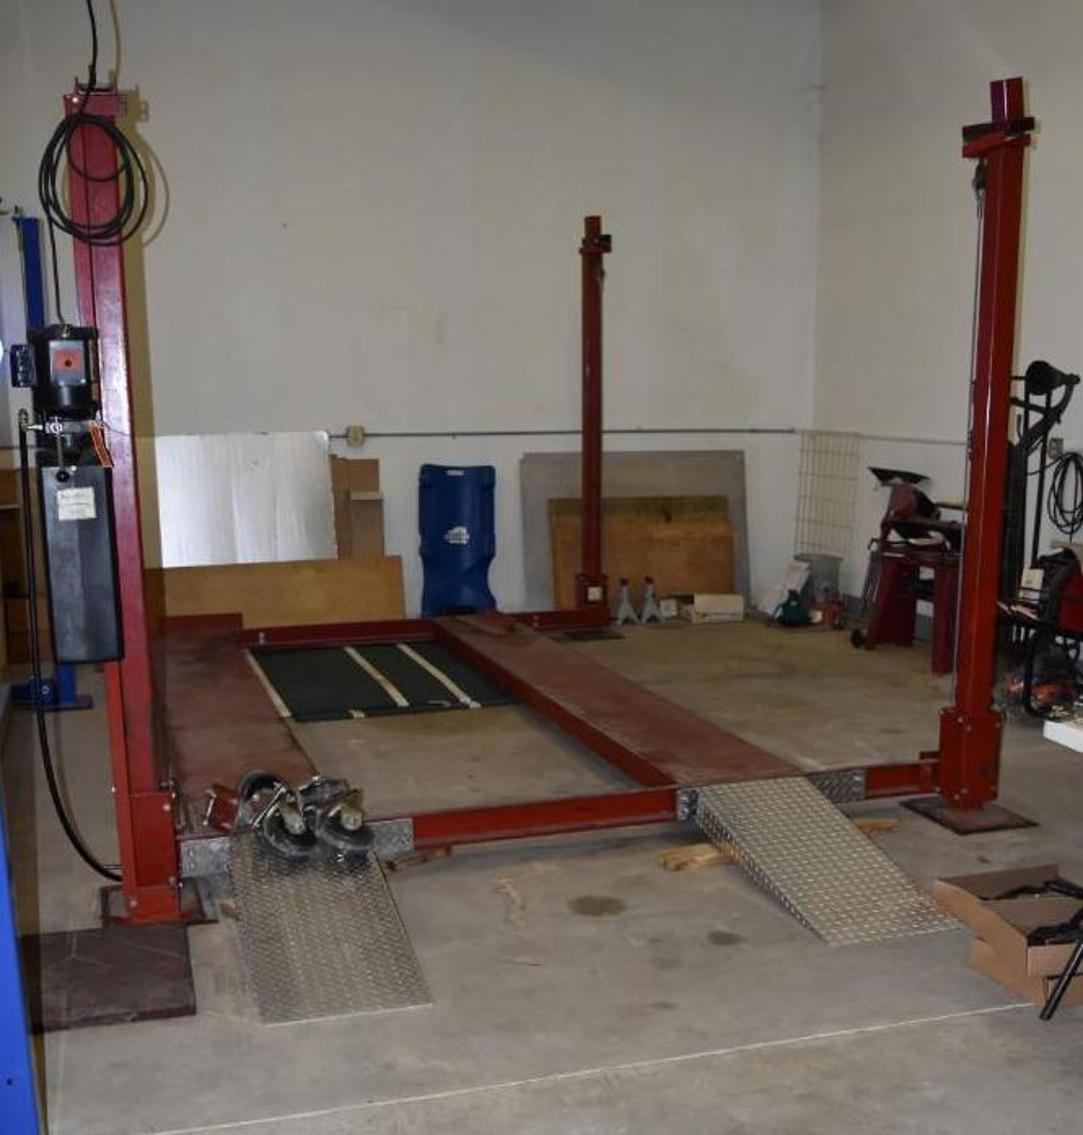 M.I. Steel Auto Lift, Lift Table, Lincoln Welder, Electric, (2) Heated Jackets and Harley Davidson Boots